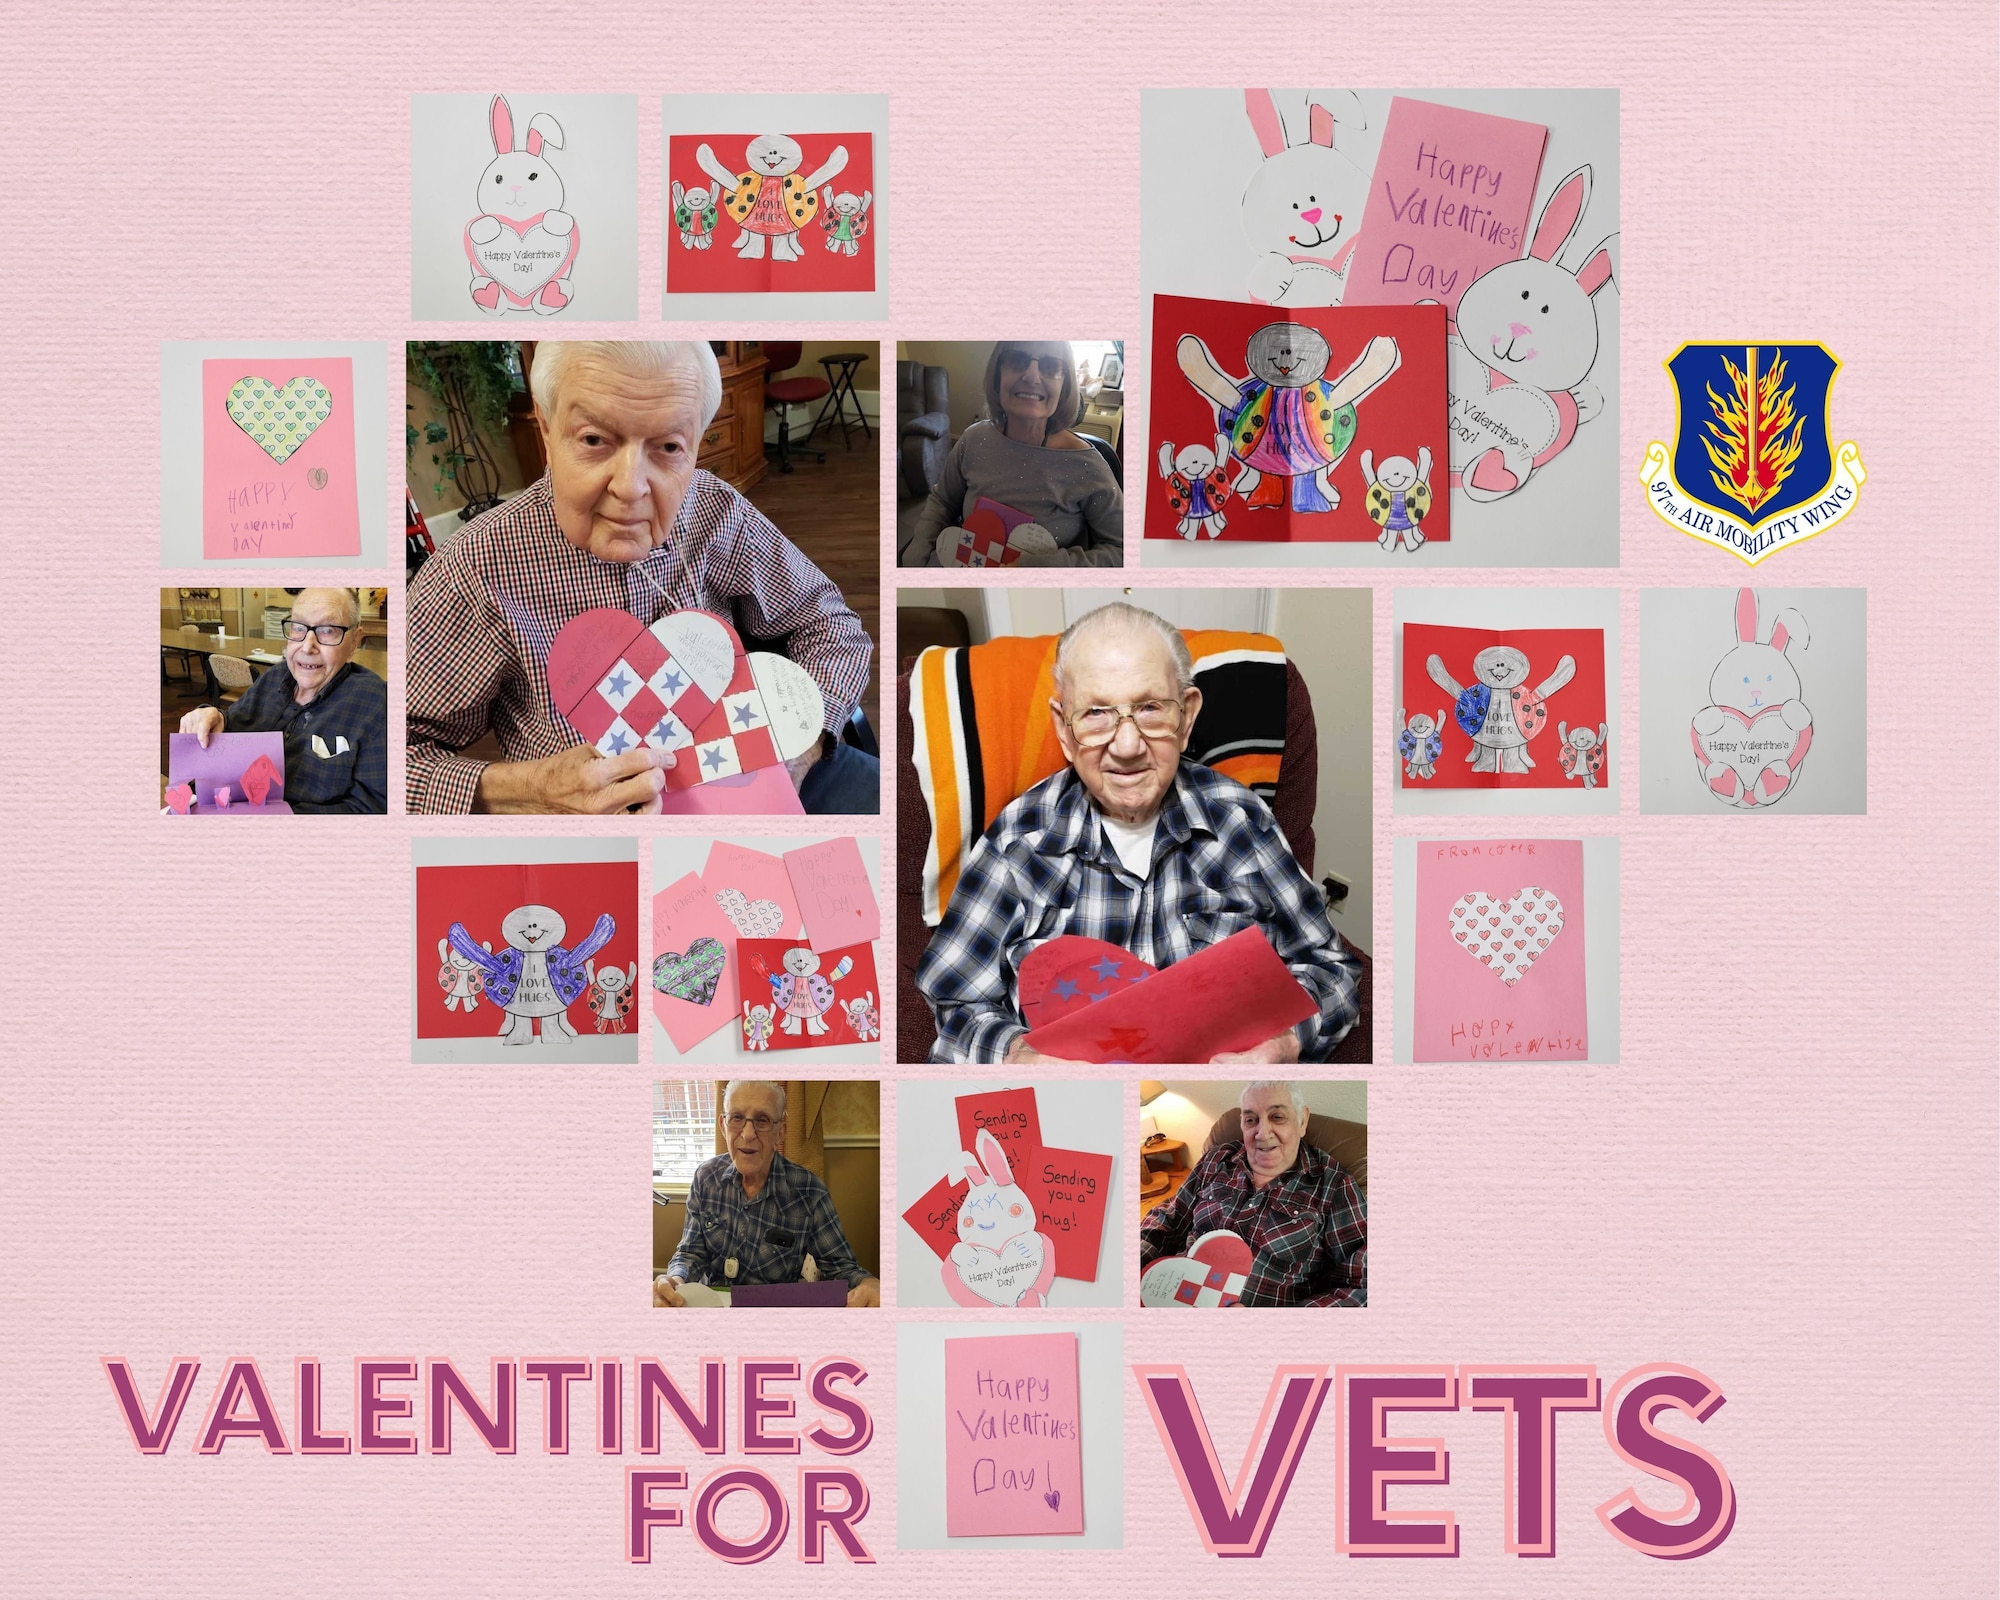 Veterans from Tamarack Assisted Living Center hold up their hand-made valentines’ cards that they received from Rivers Elementary School students at Tamarack Assisted Living Center in Altus, Oklahoma, February 24, 2021. Photos courtesy of Tamarack Assisted Living Center. (U.S. Air Force graphic by Airman 1st Class Amanda Lovelace)